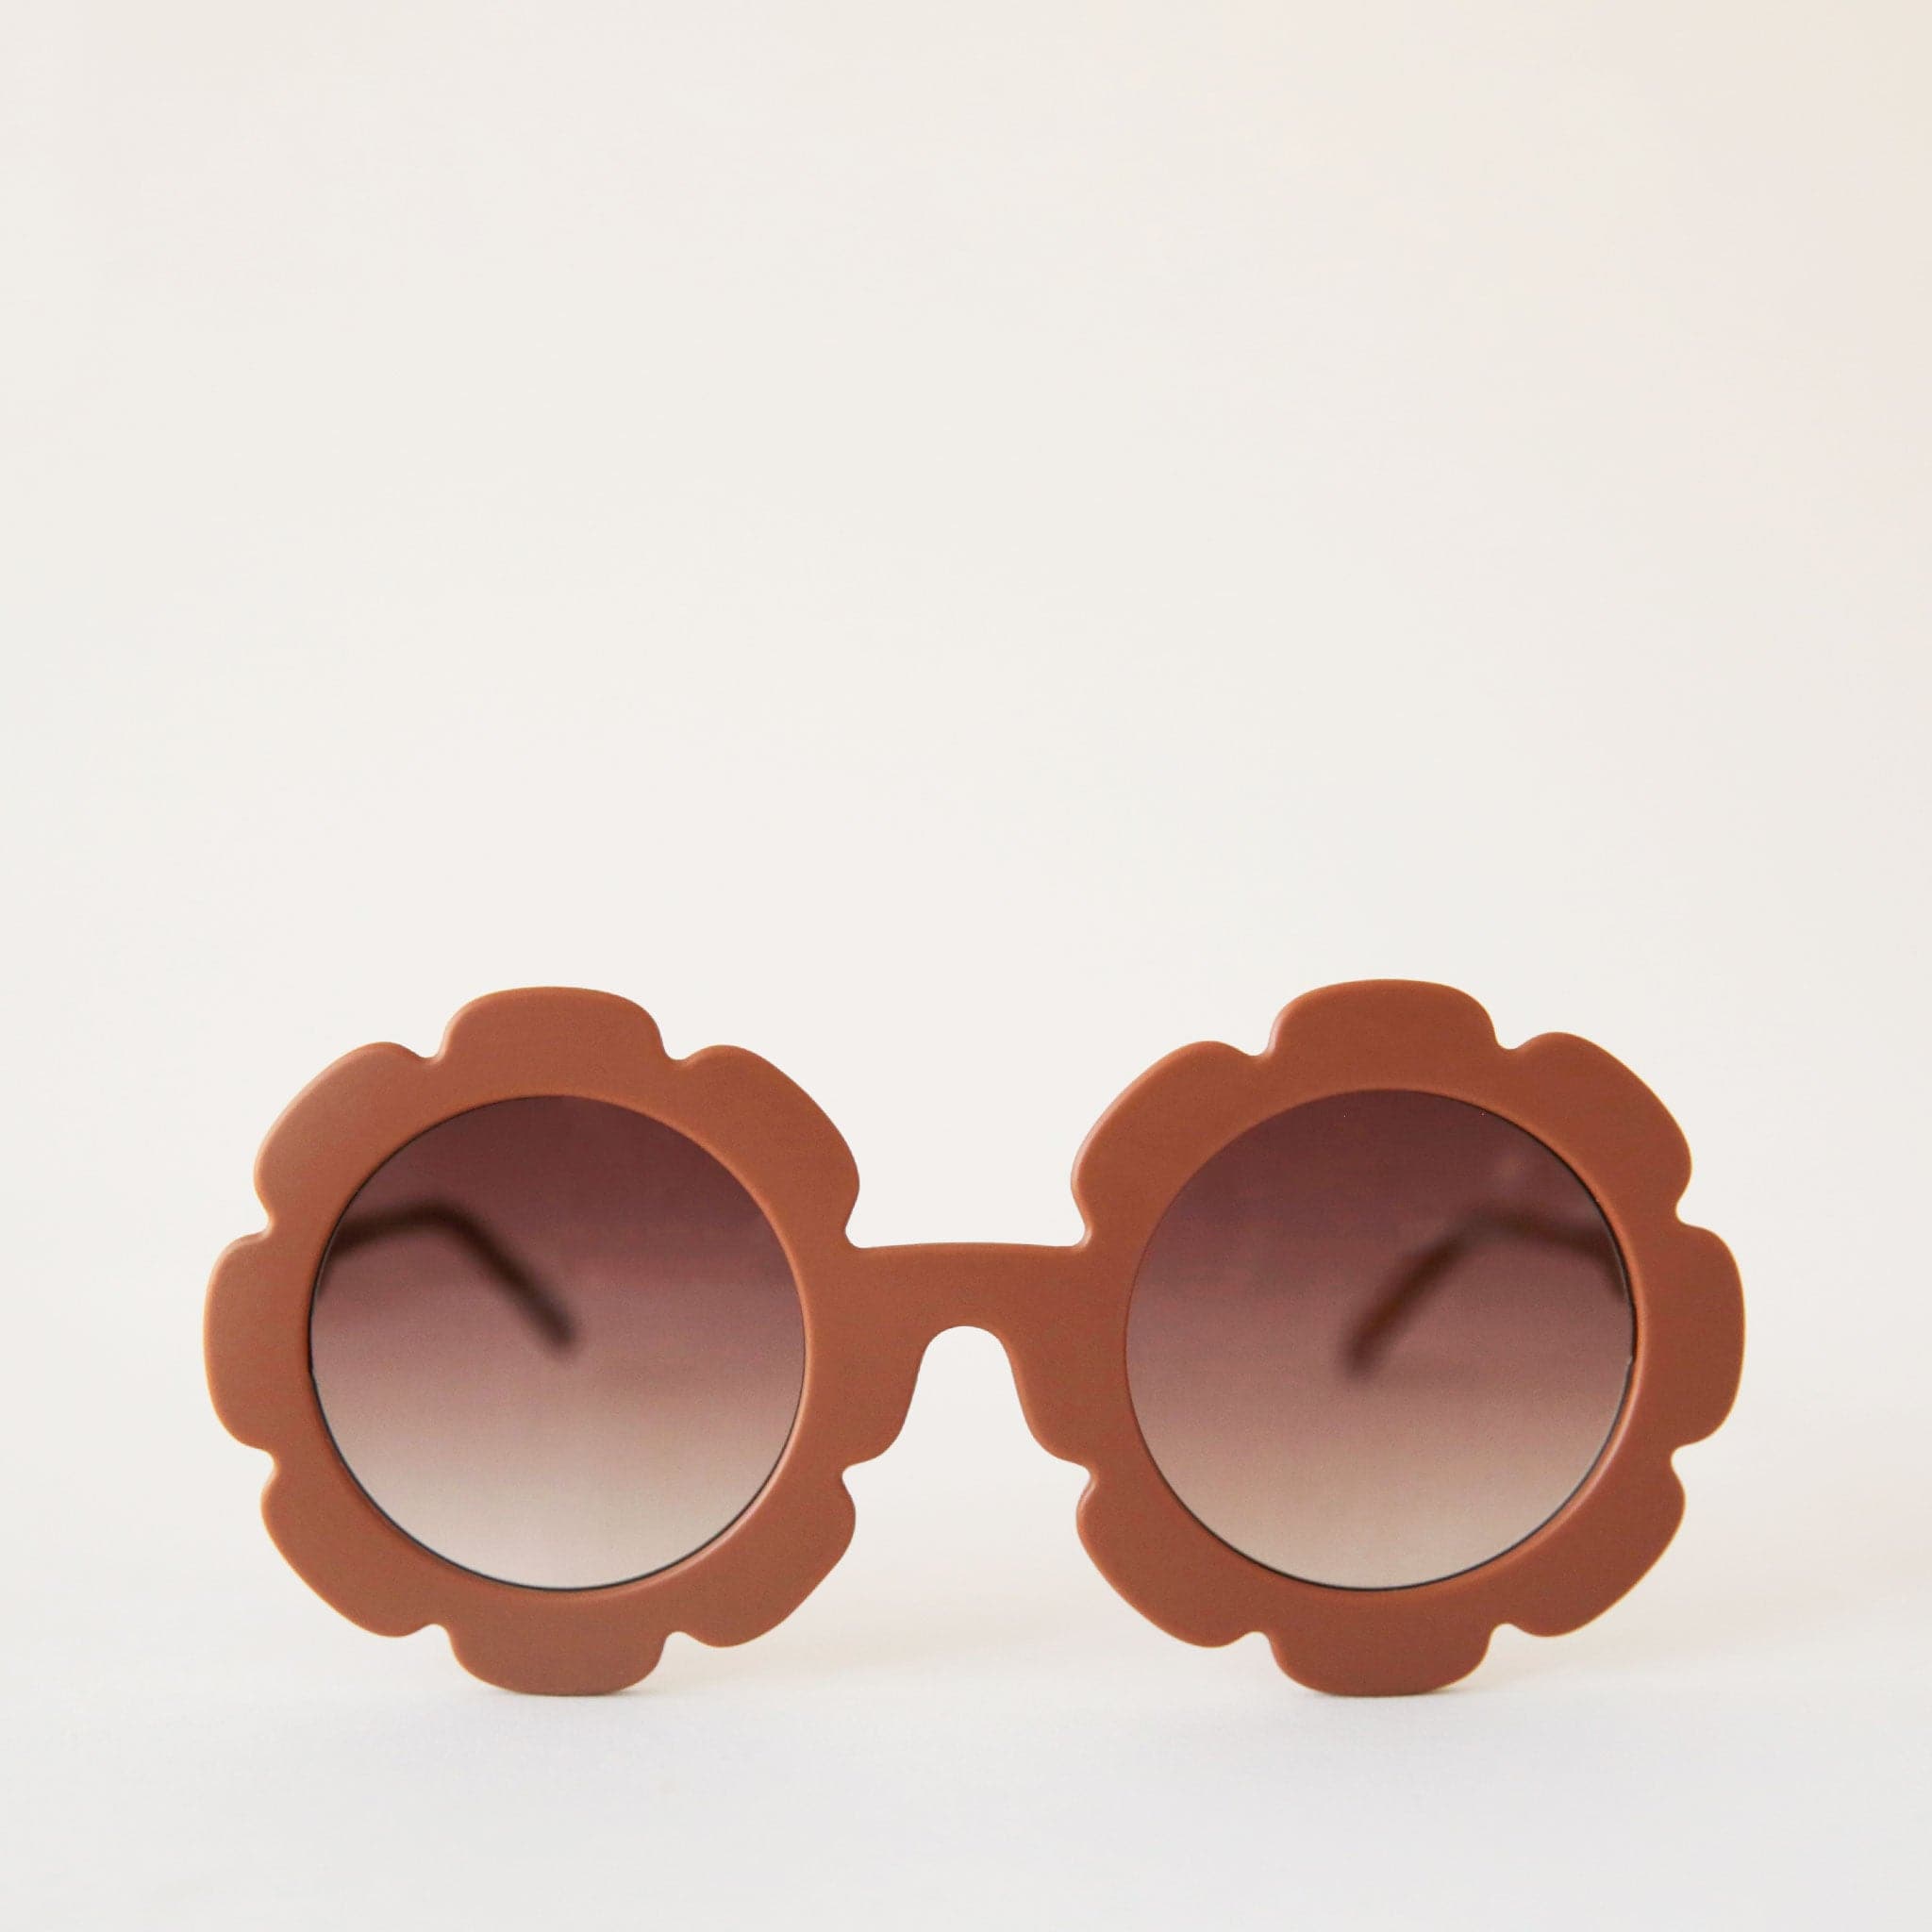 Brown flower shaped sunglasses with light brown circle lenses in the center.